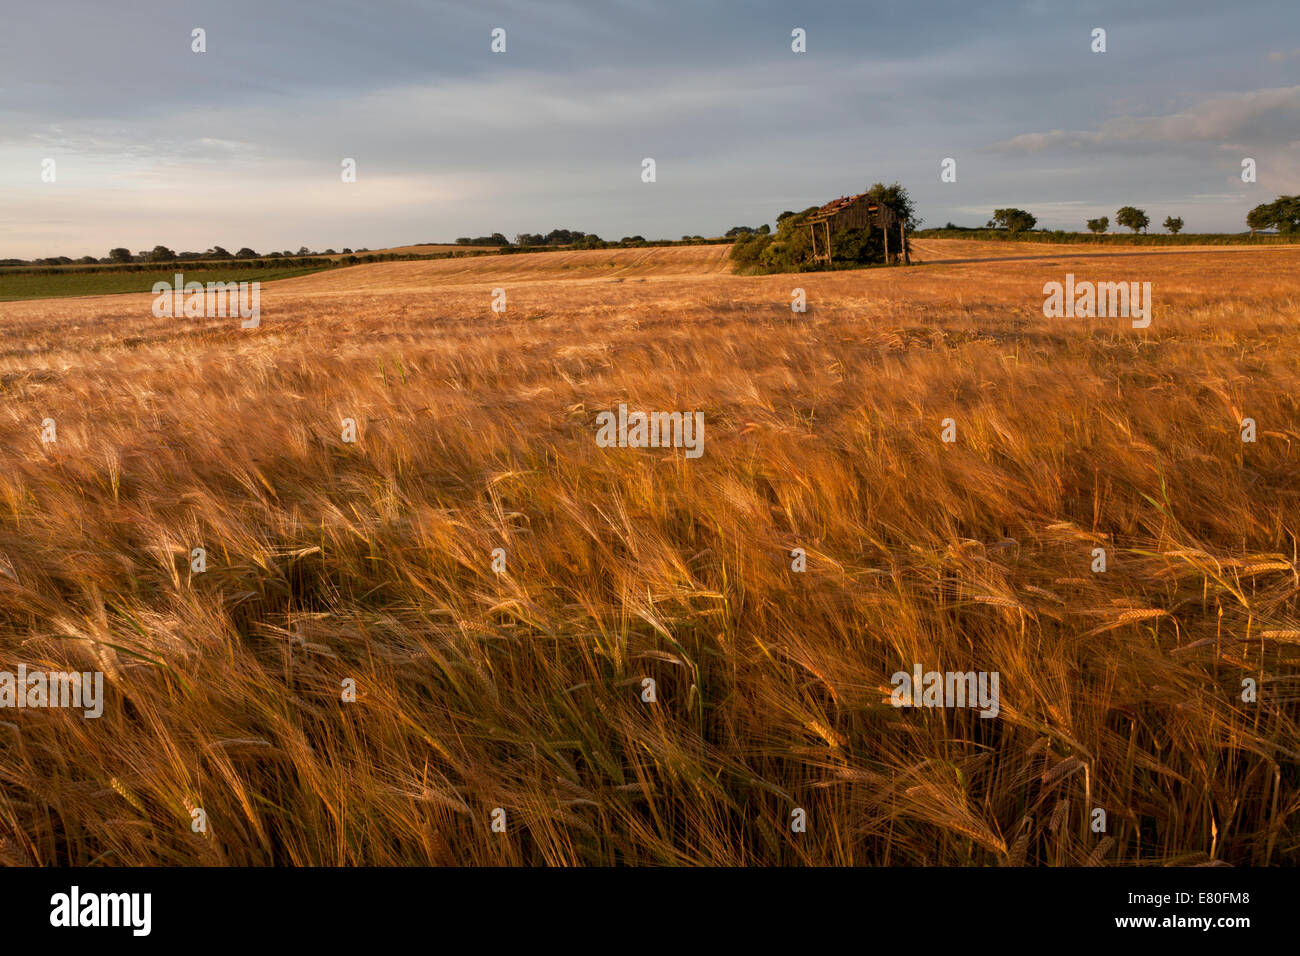 Barley fields in summer with a old broken barn Stock Photo